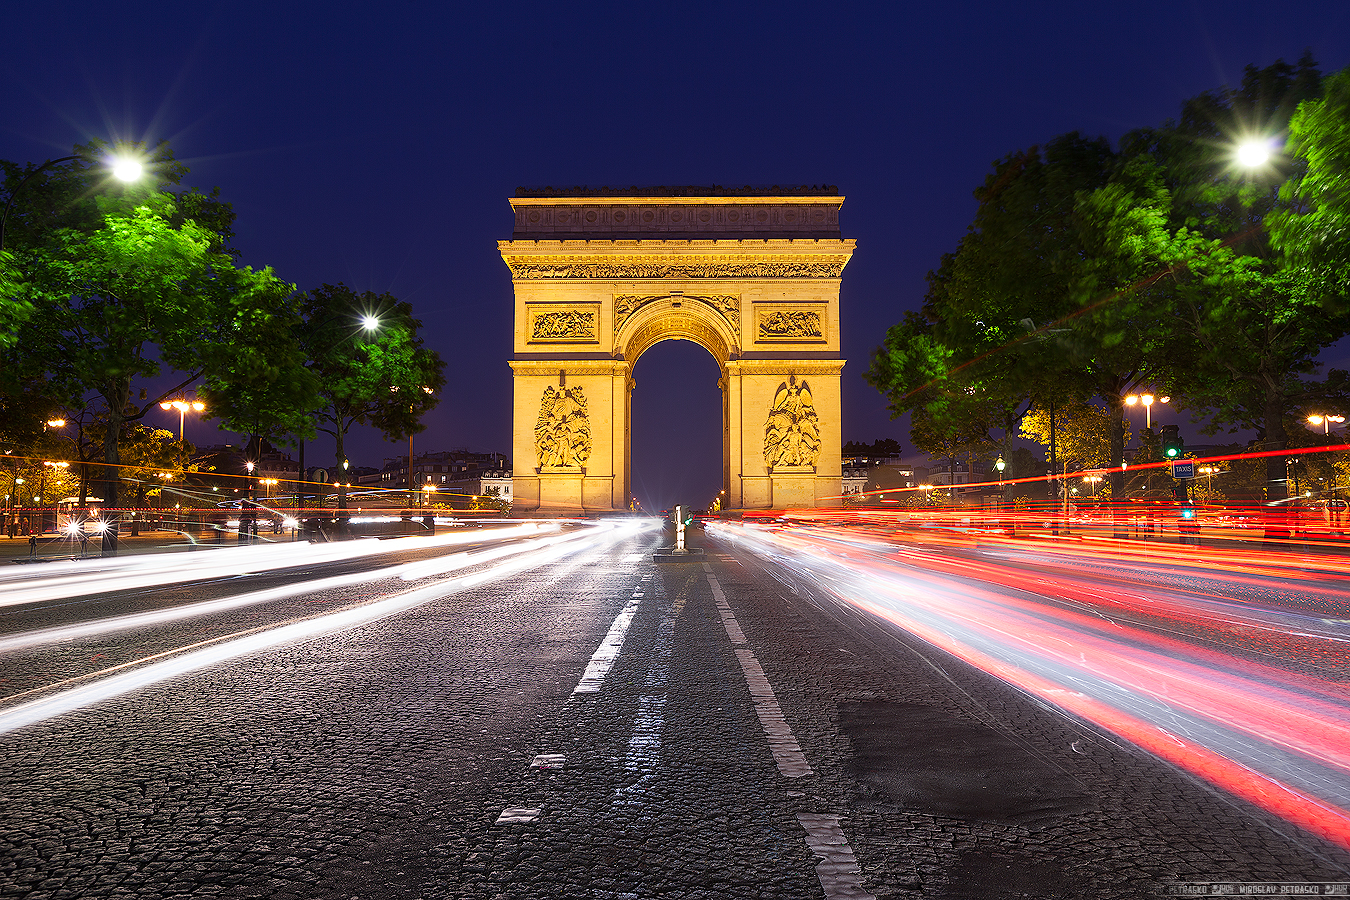 Traffic at the Arc De Triomphe - HDRshooter